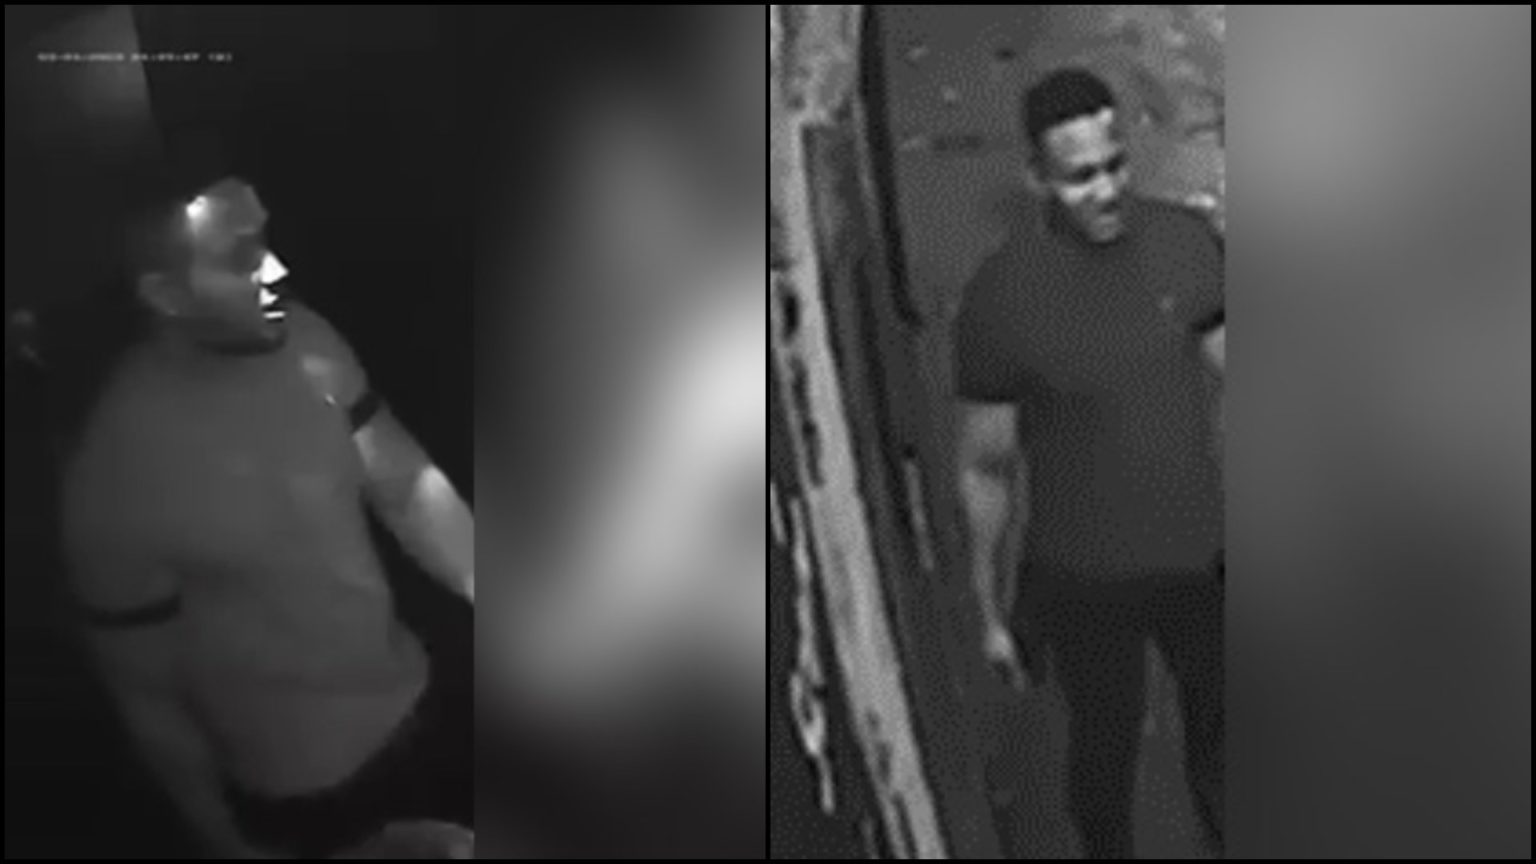 Cctv Appeal After Alleged Sexual Assault In Lincoln